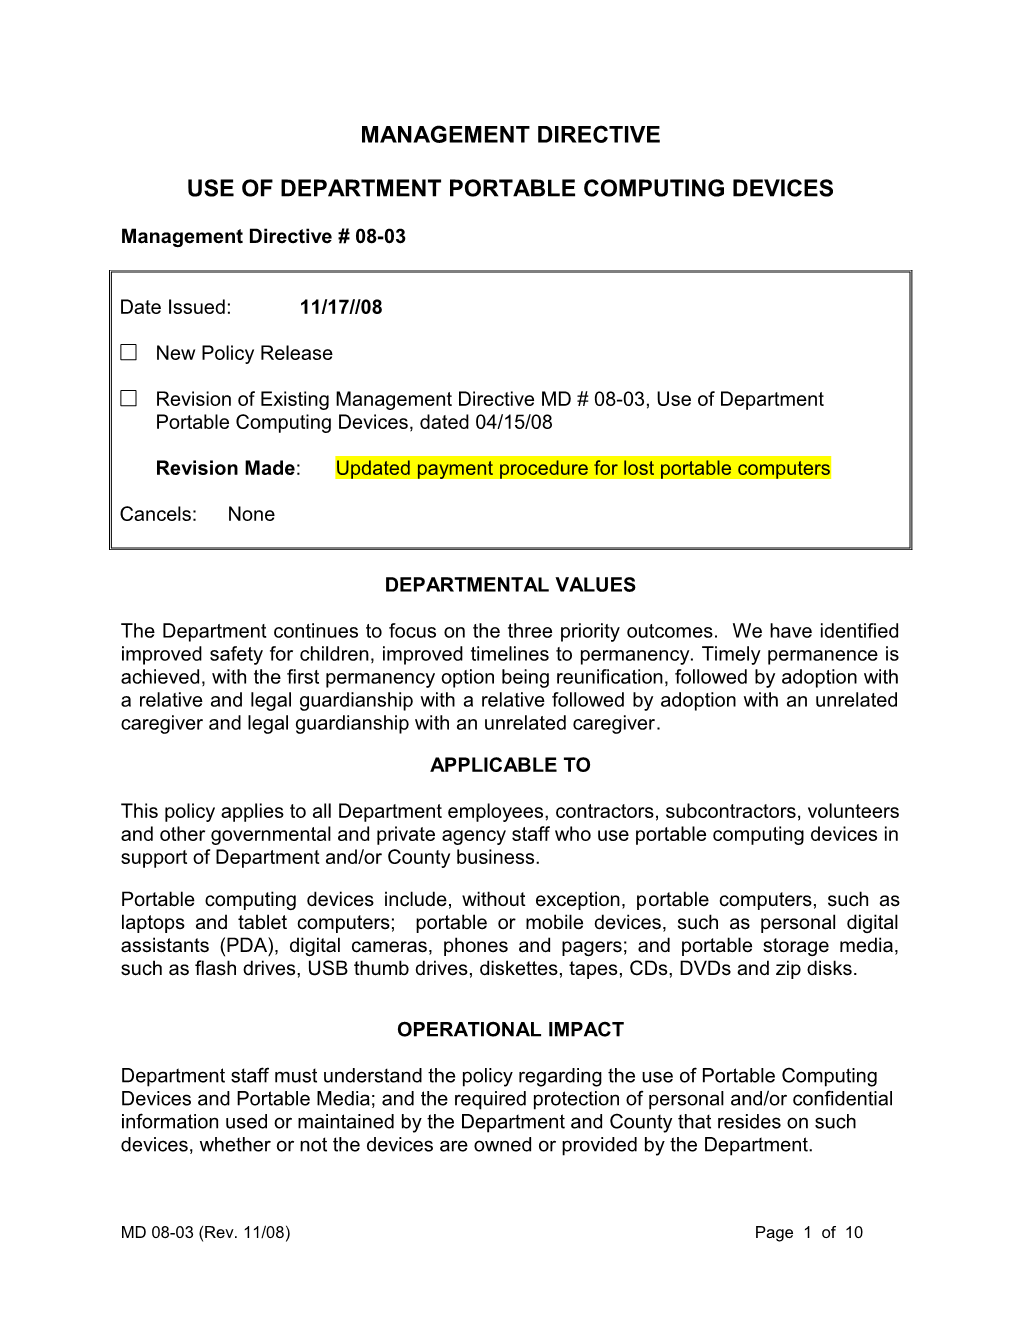 Use of Department Portable Computing Devices